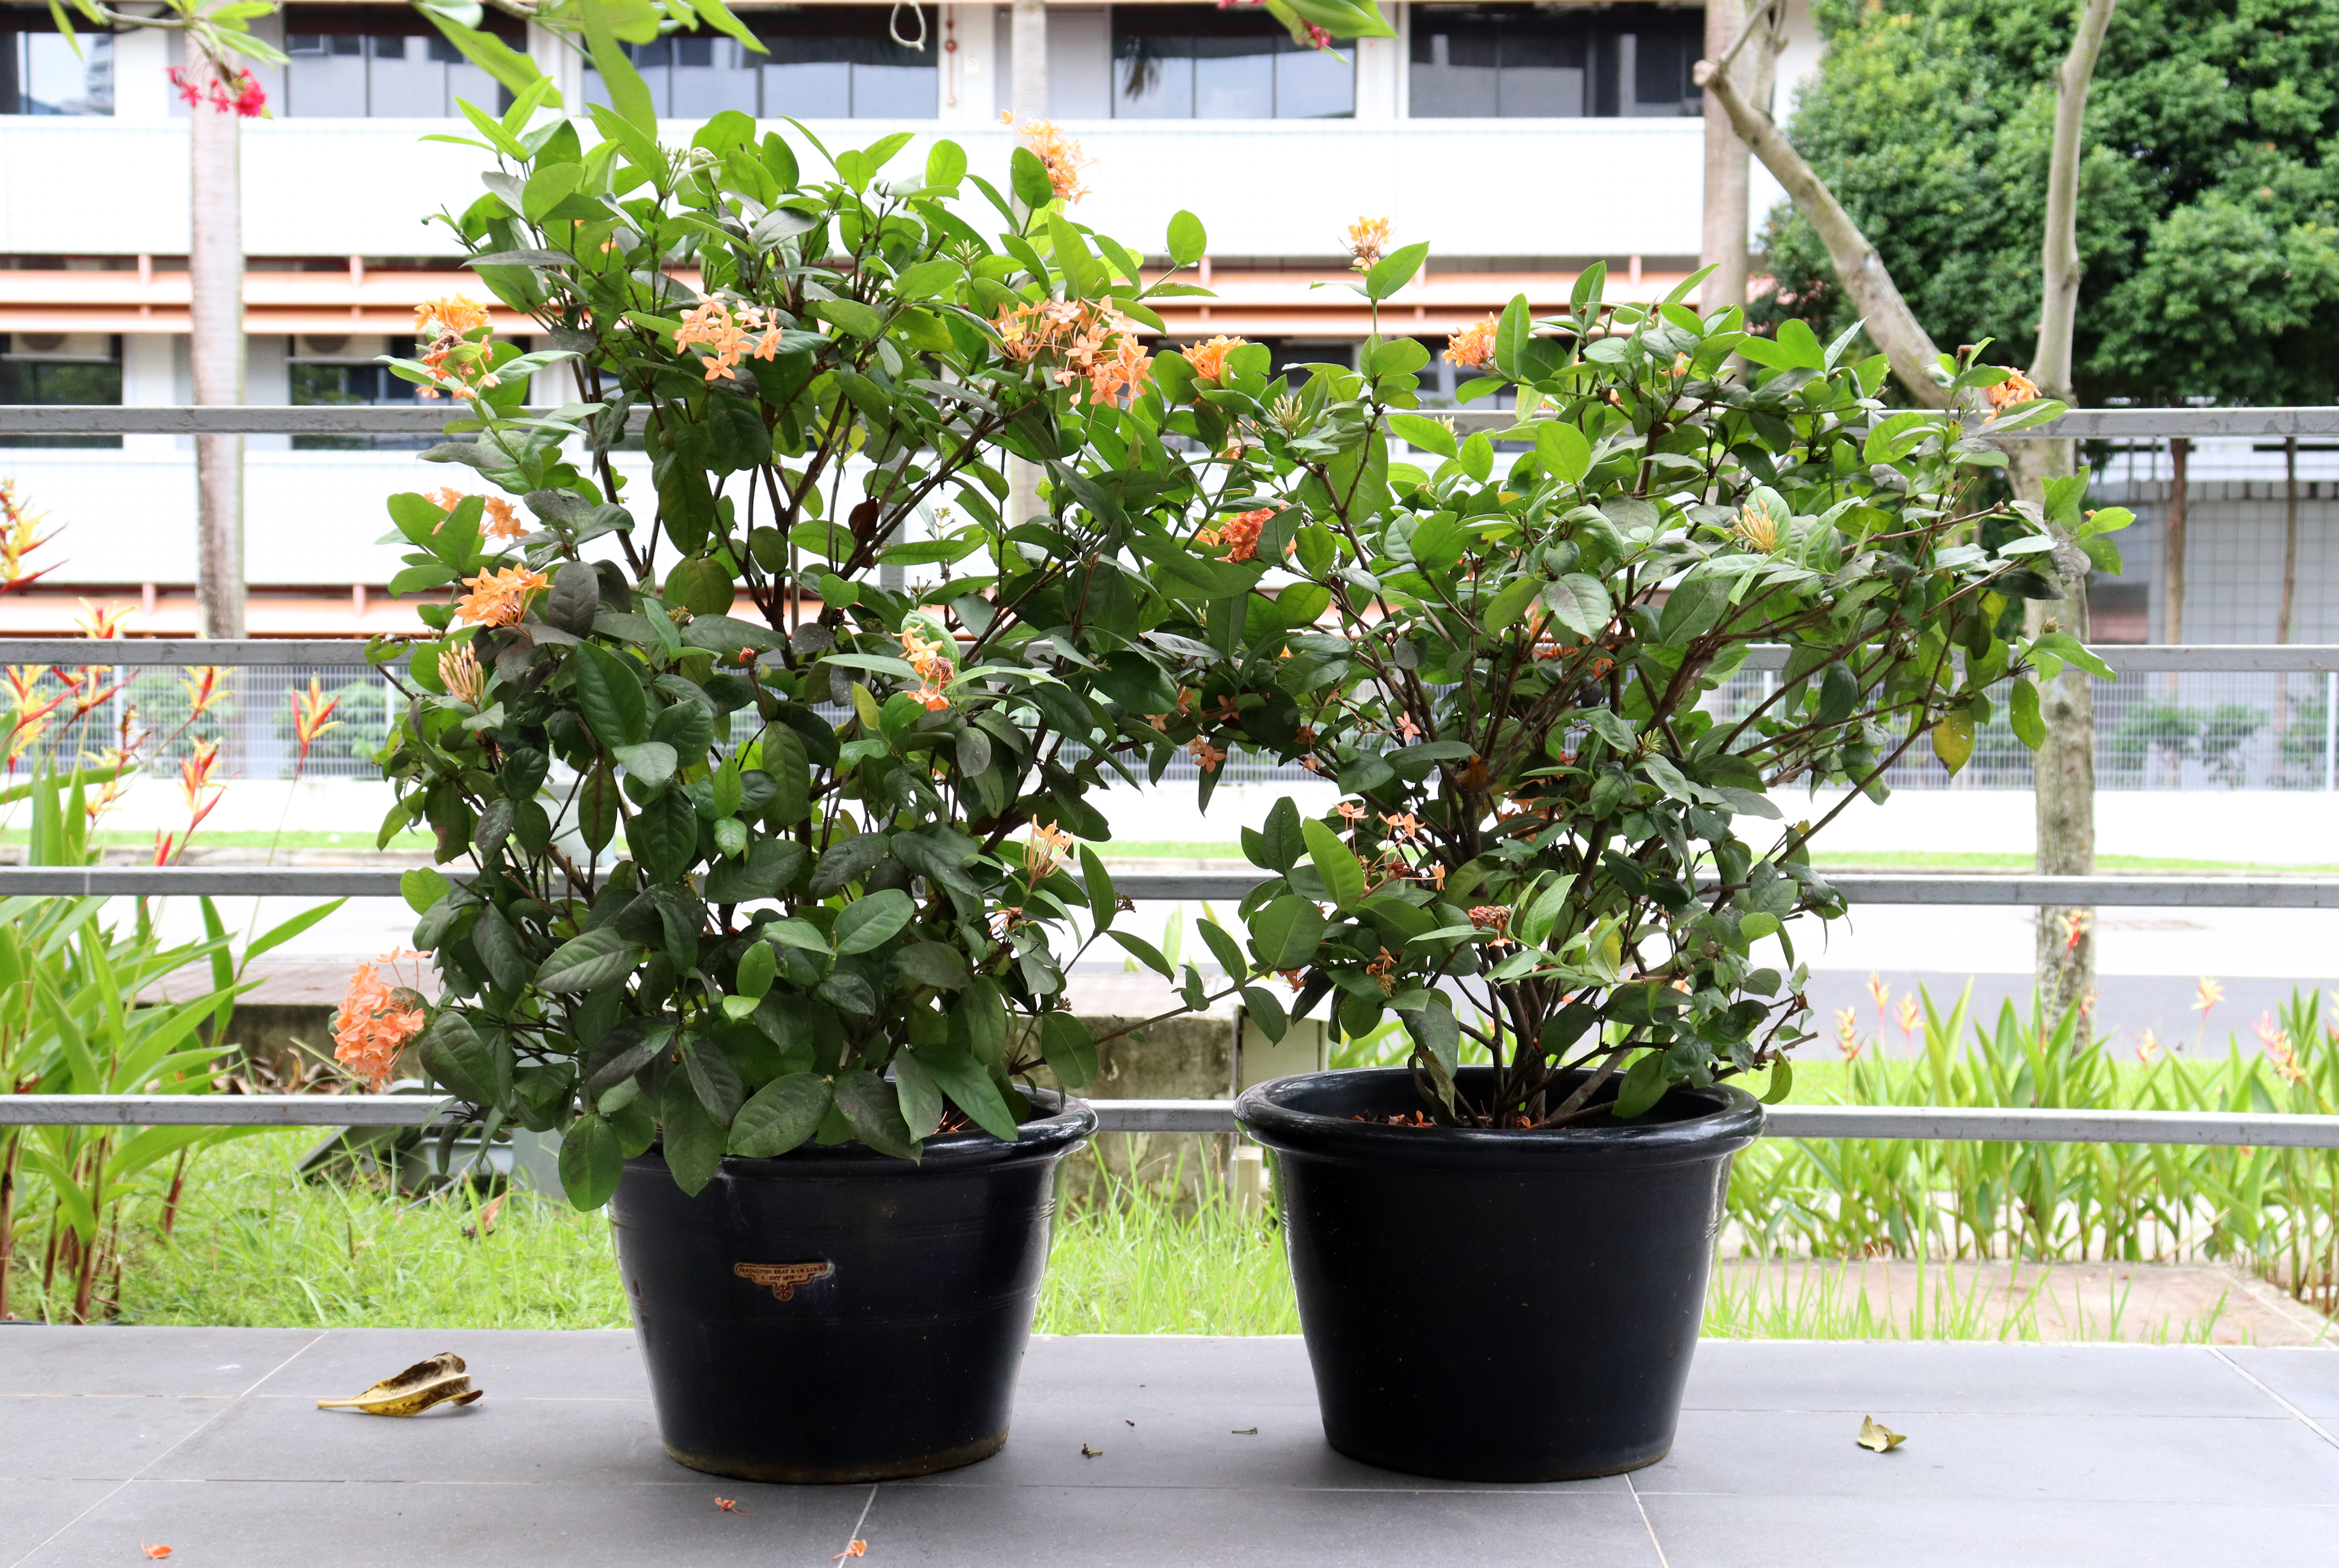 A PAIR OF BLACK CERAMIC POTS WITH PLANTS